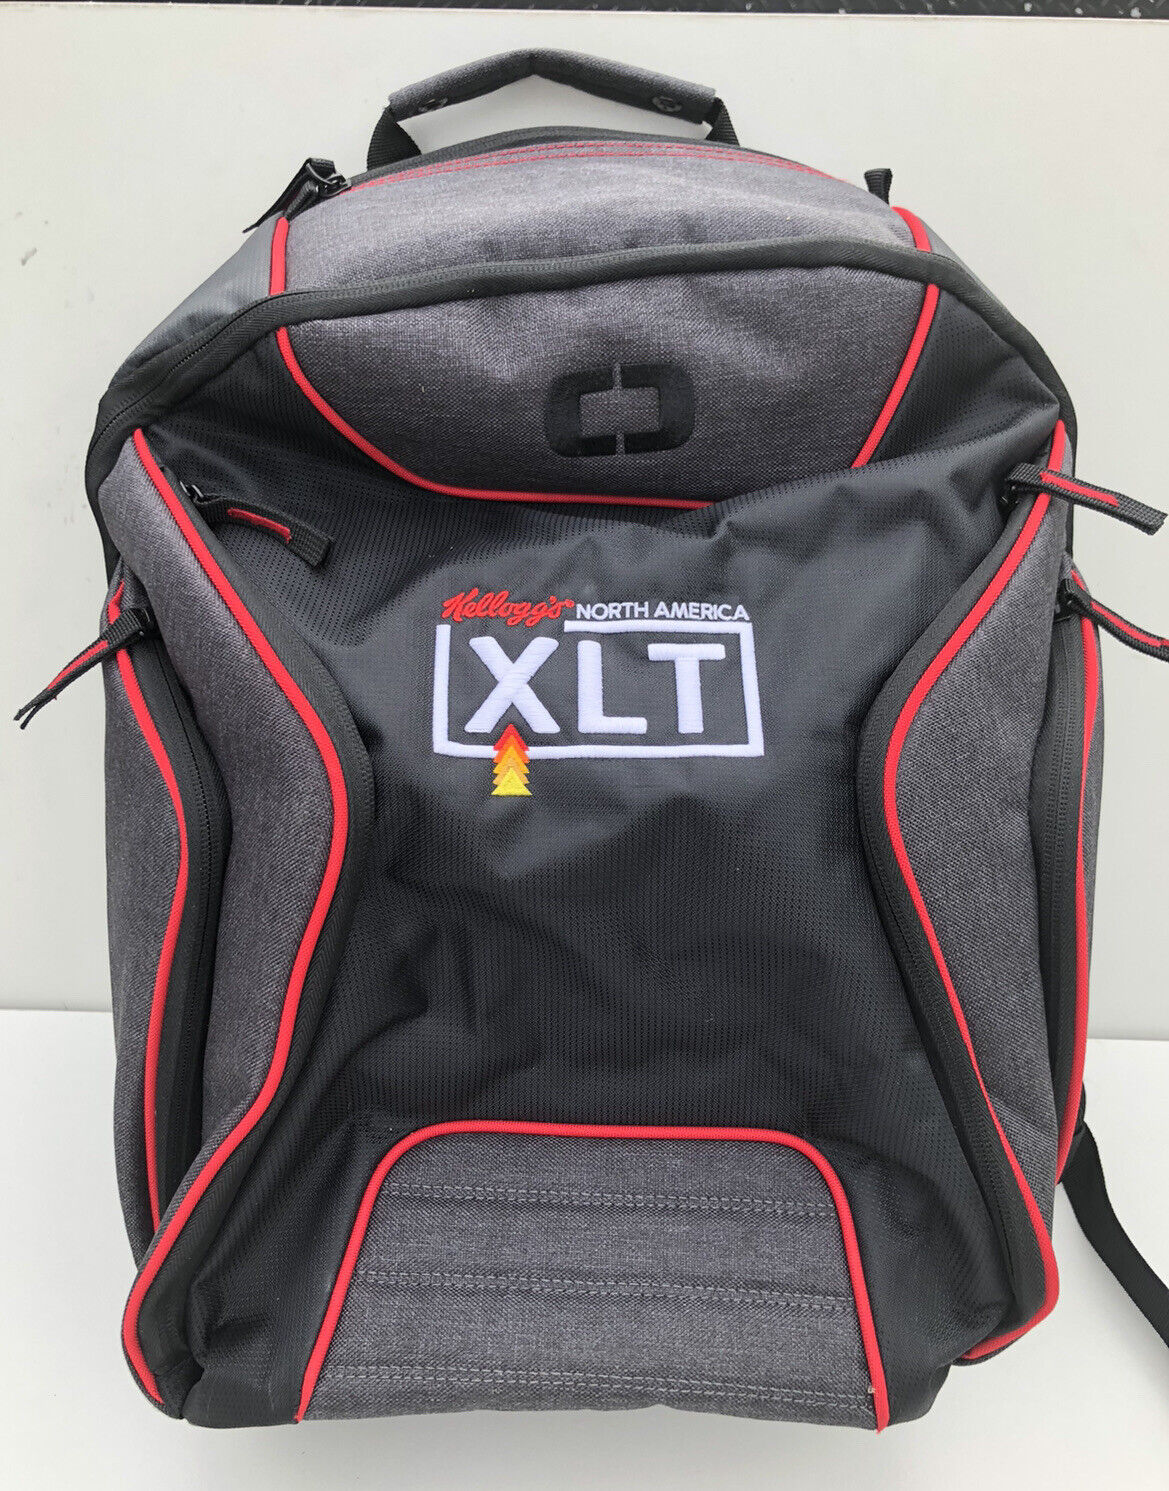 Ogio Backpack Kelloggs “North America XLT” Promotional Red & Black Logo Patch